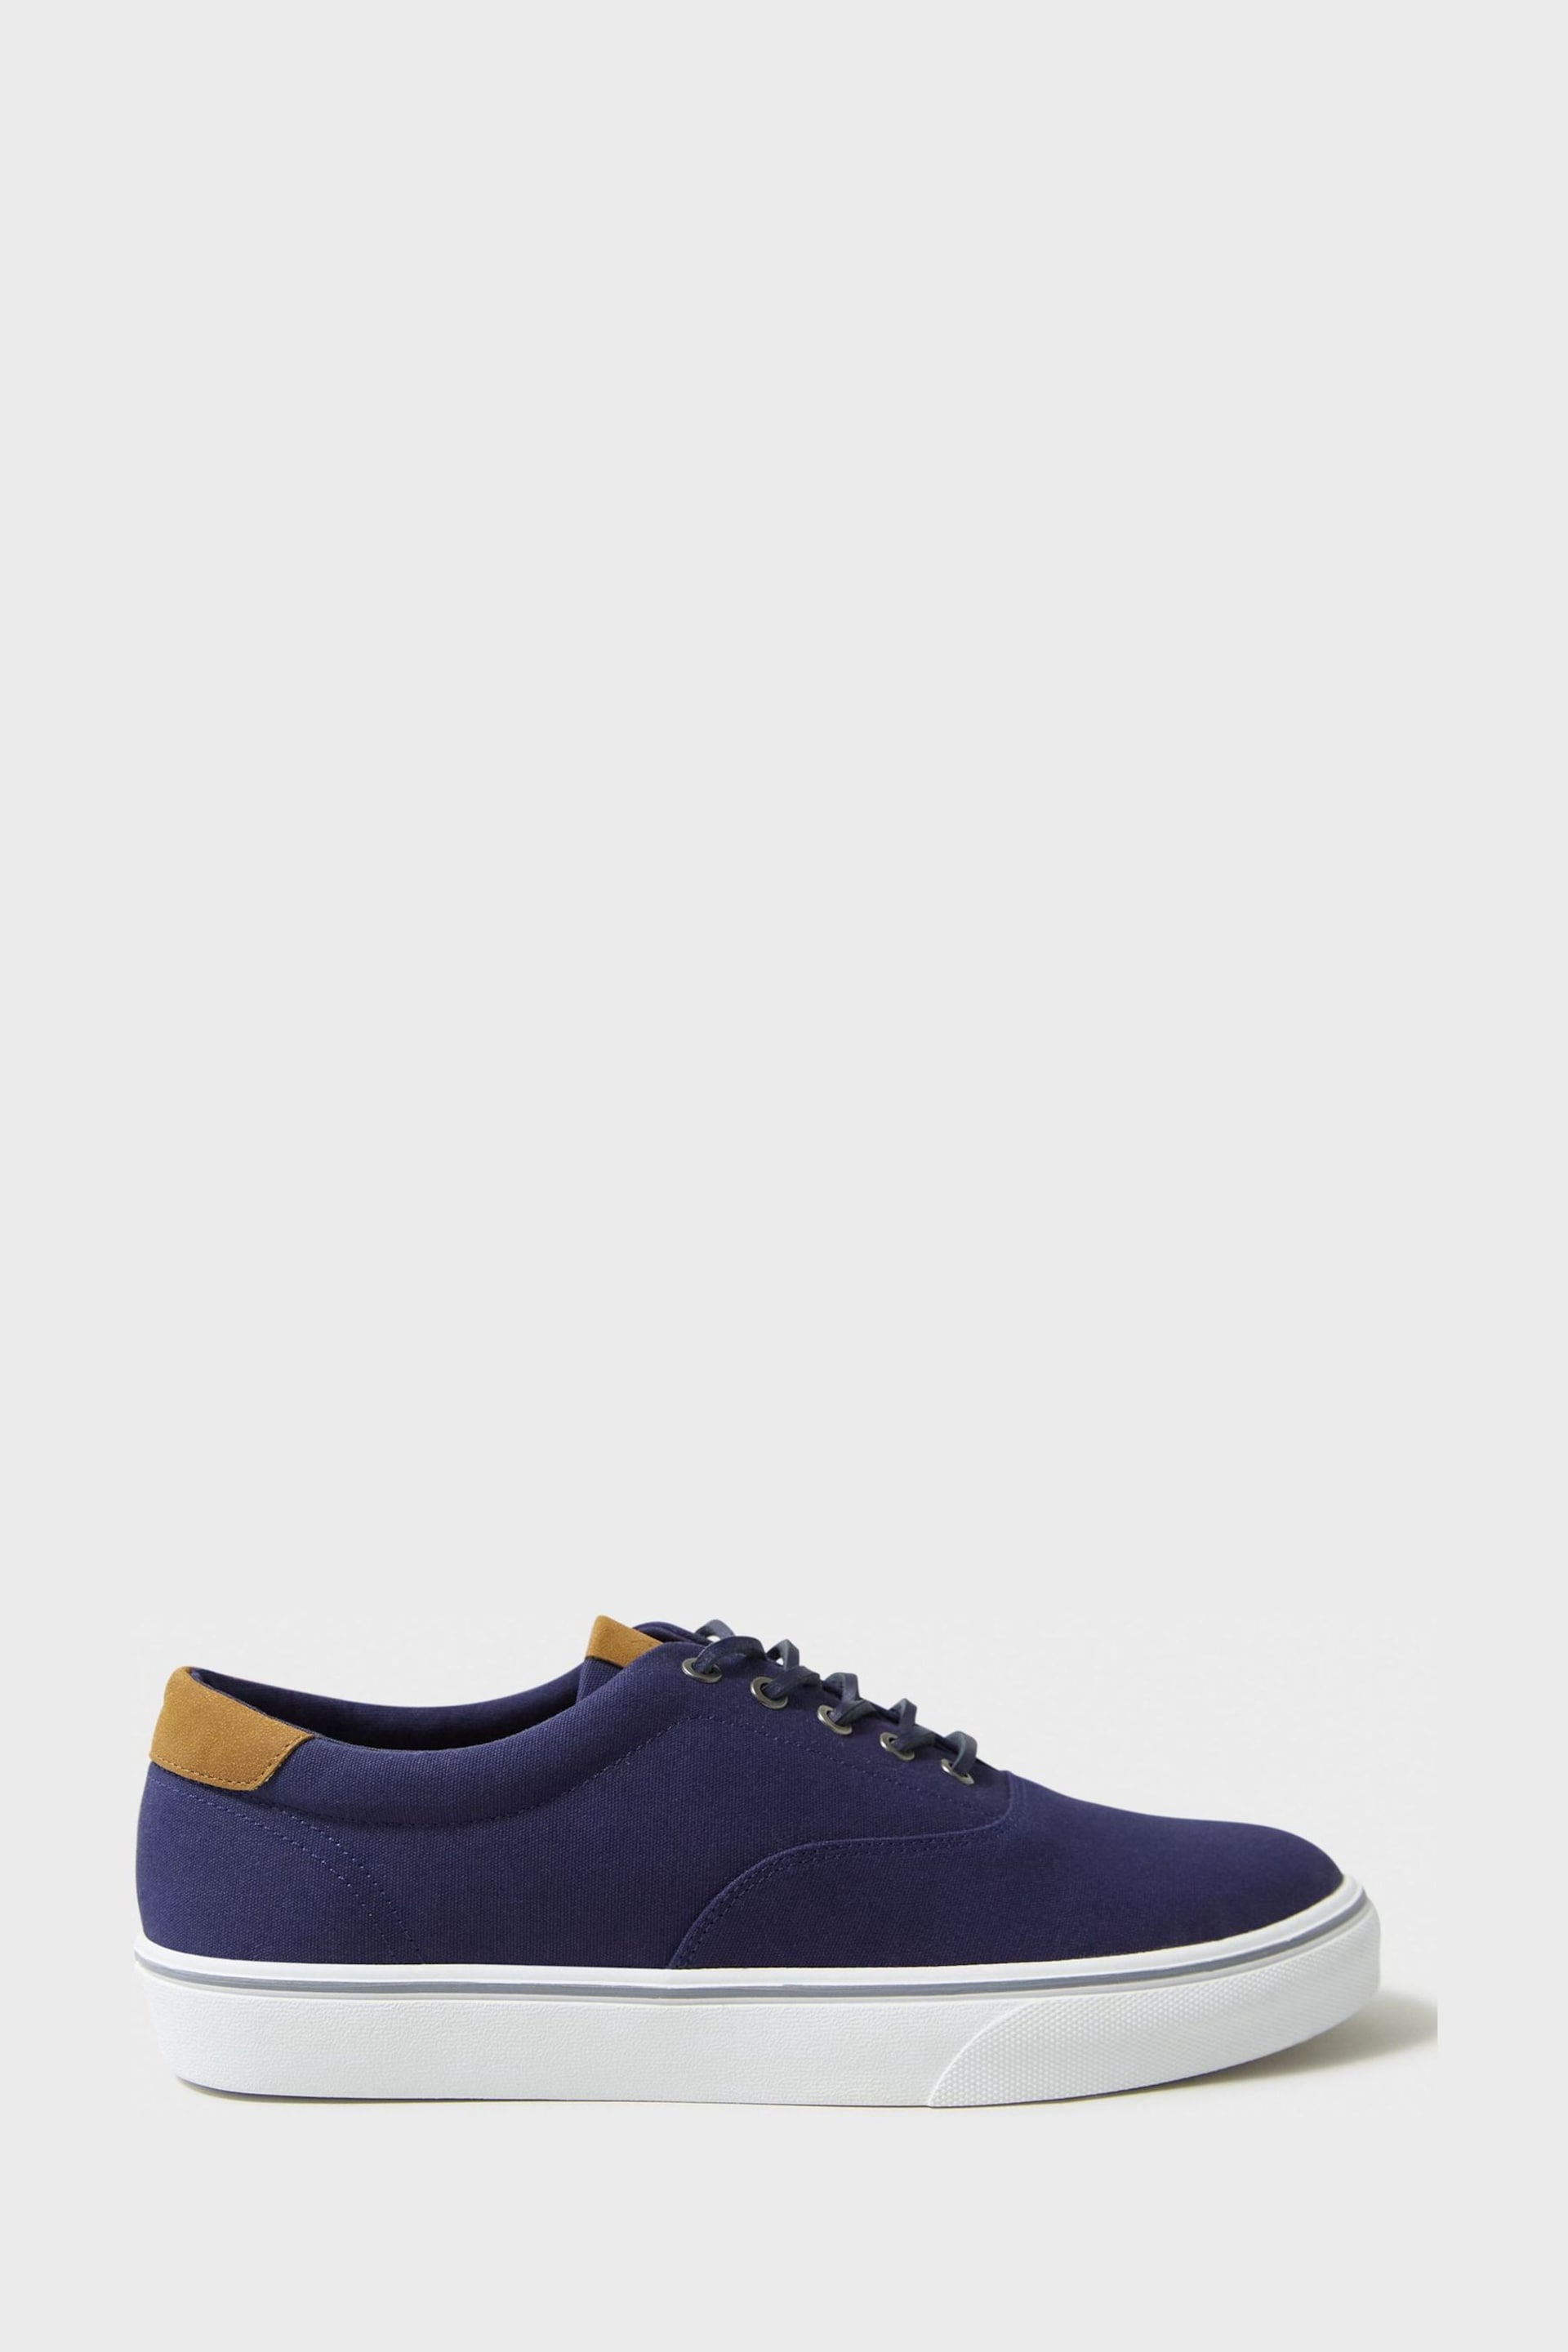 Crew Clothing Company Blue Trainers - Image 3 of 5